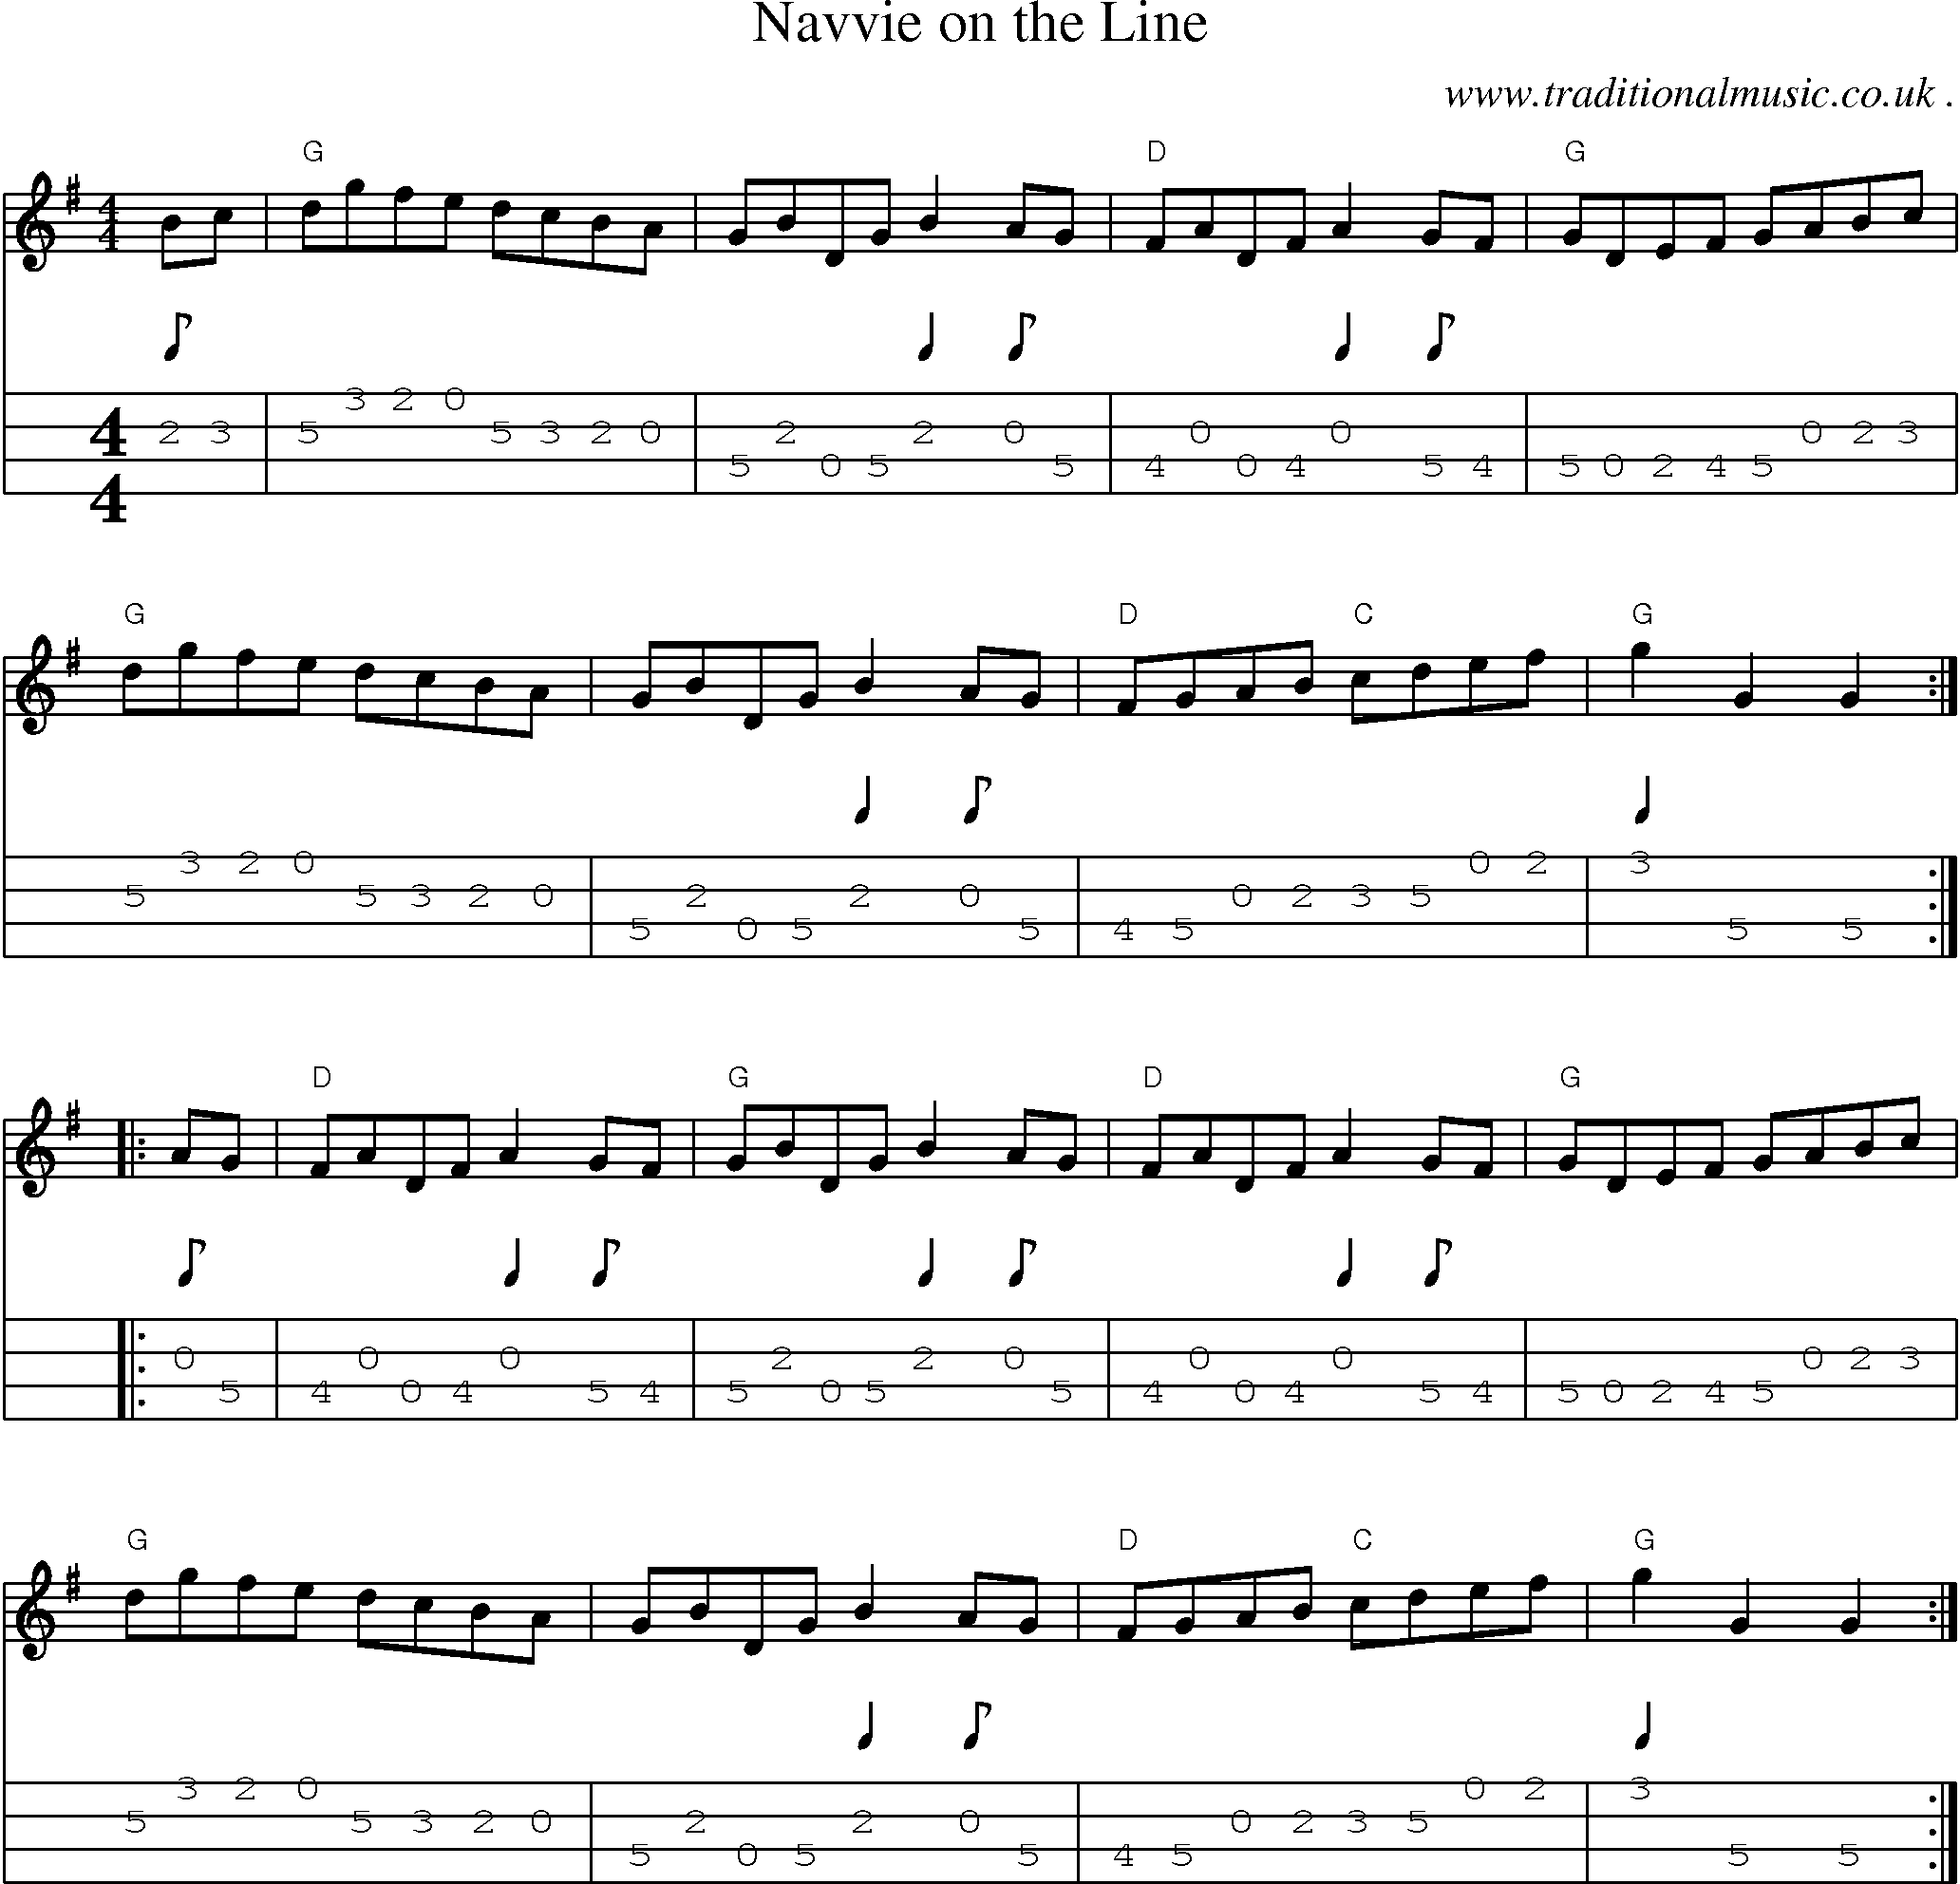 Music Score and Guitar Tabs for Navvie on the Line